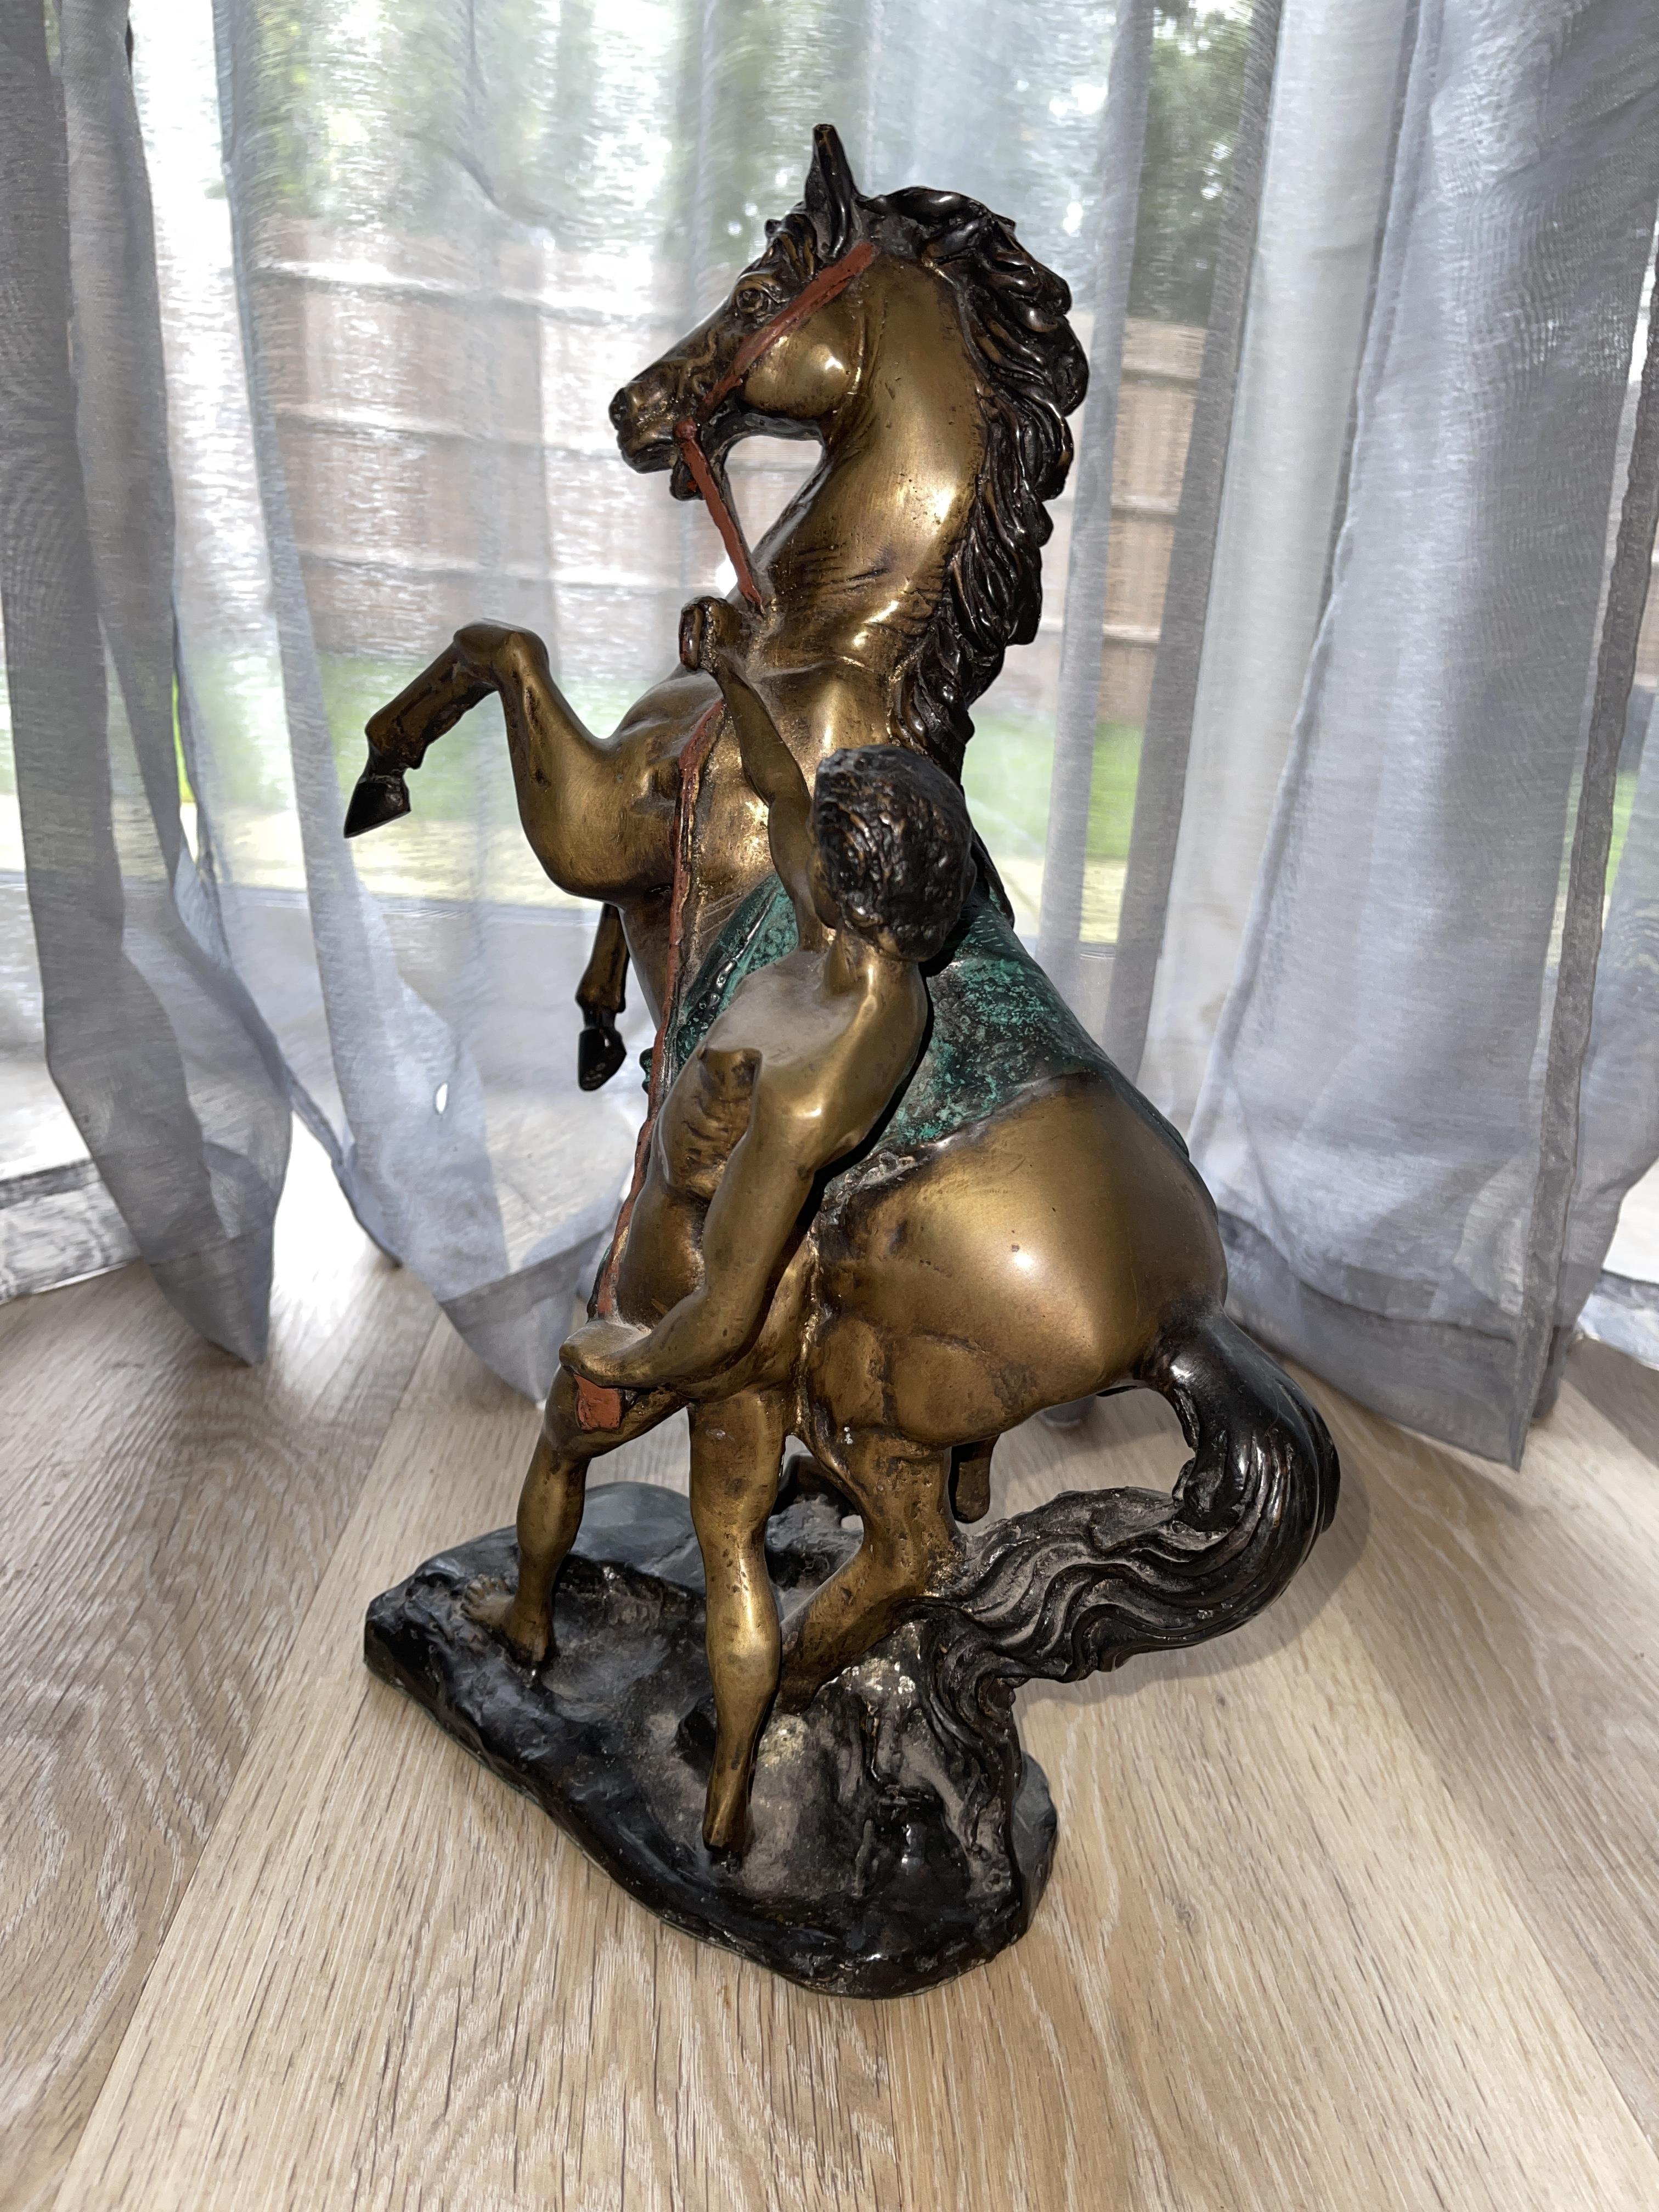 Pair of Bronze Statues - Man With Rearing Horse - Image 12 of 20